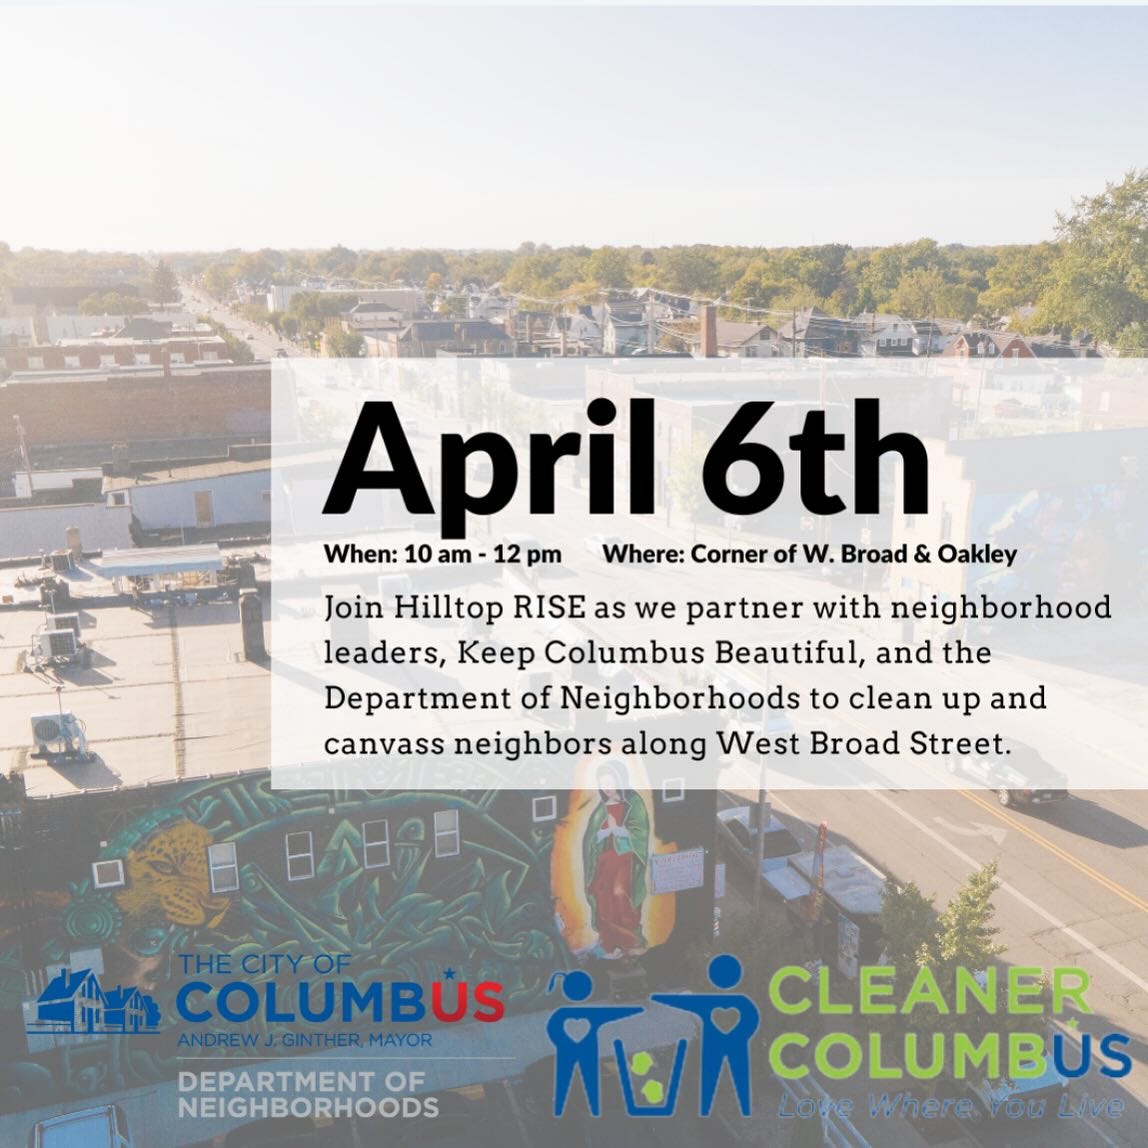 May be an image of text that says 'April 6th When: 10 am pm Where: Corner W. Broad & Oakley Join Hilltop RISE as we partner with neighborhood leaders, Keep Columbus Beautiful, and the Department of Neighborhoods to clean up and canvass neighbors along West Broad Street. DEPARTMENT OF NEIGHBORHOODS COLUMB US ਜ COLUMBUS CLEANER Where'